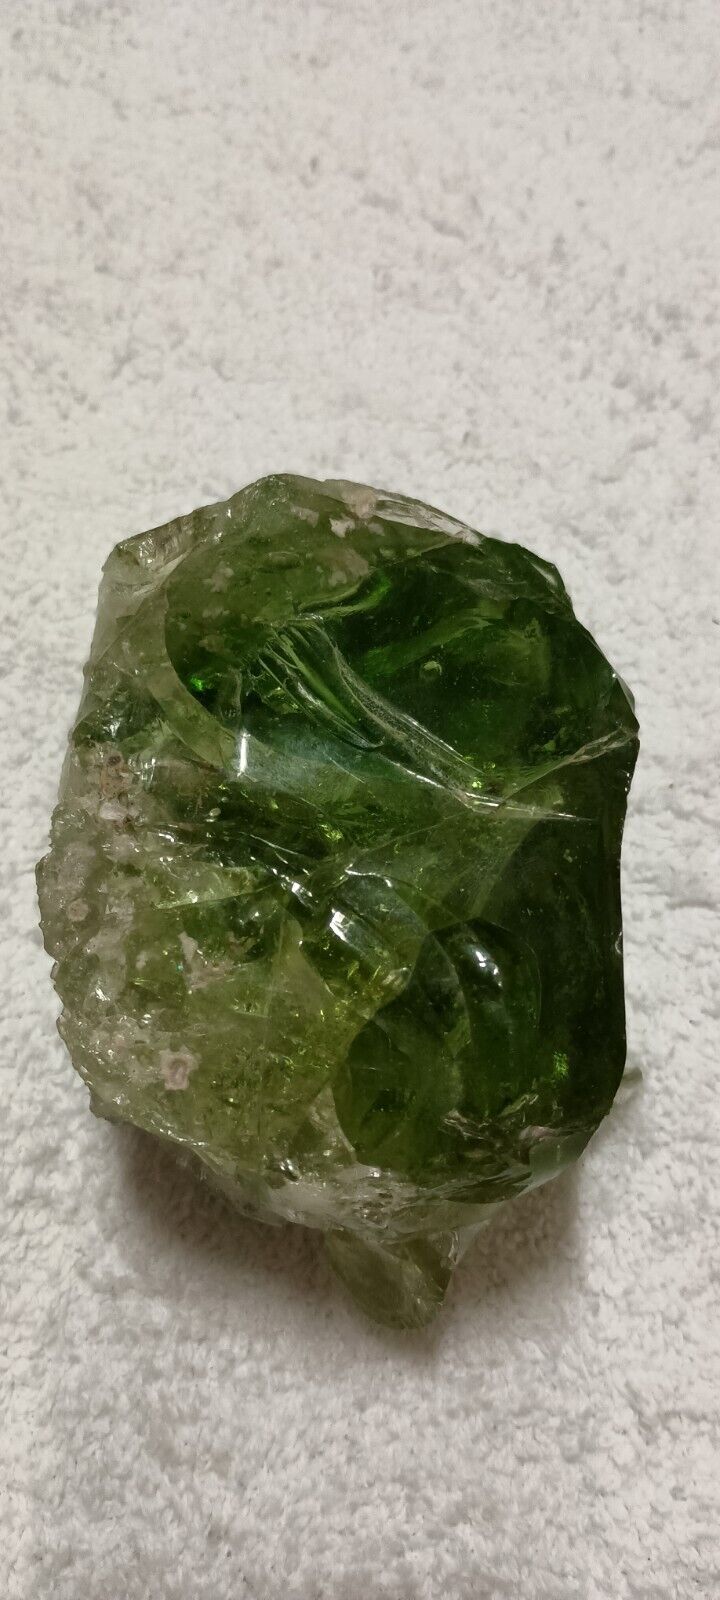 Large Cut Recycled Stone Glass Rock Chunk Rough Cut Crystal Stone